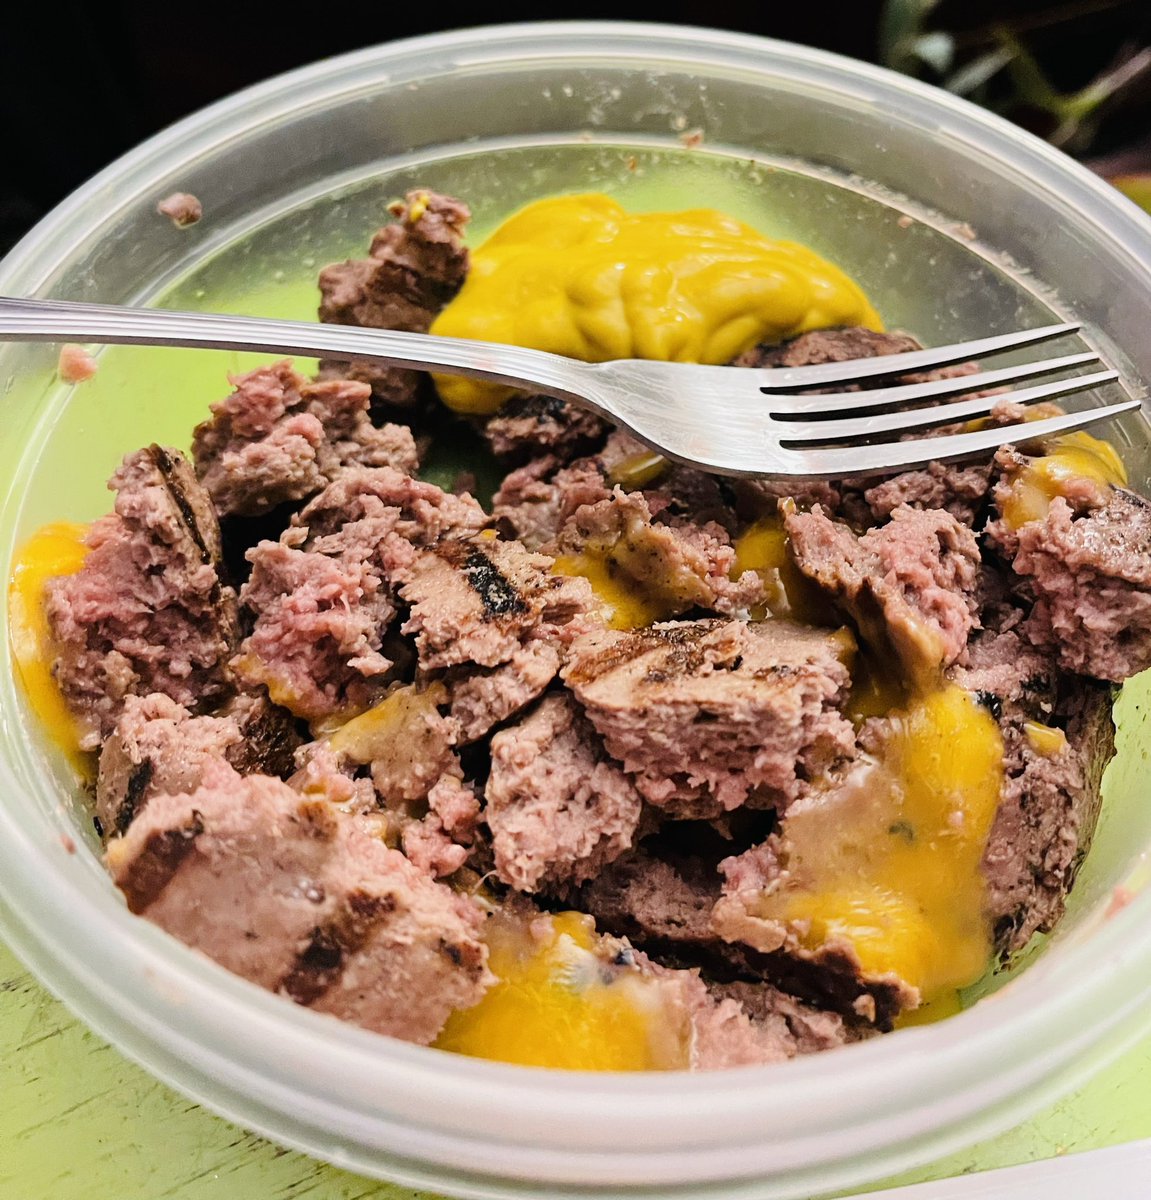 Day 7️⃣8️⃣ (5.18.24): Indulging in some late night snackin’ - 1 pound (beef) burgers, chopped, with 2 slices of cheddar mixed in and a couple tablespoons of yellow mustard for dipping.  #carnivorewomen  #carnivoreclub #carnivoreweightloss #carnivore #liondiet
#weightloss #macros